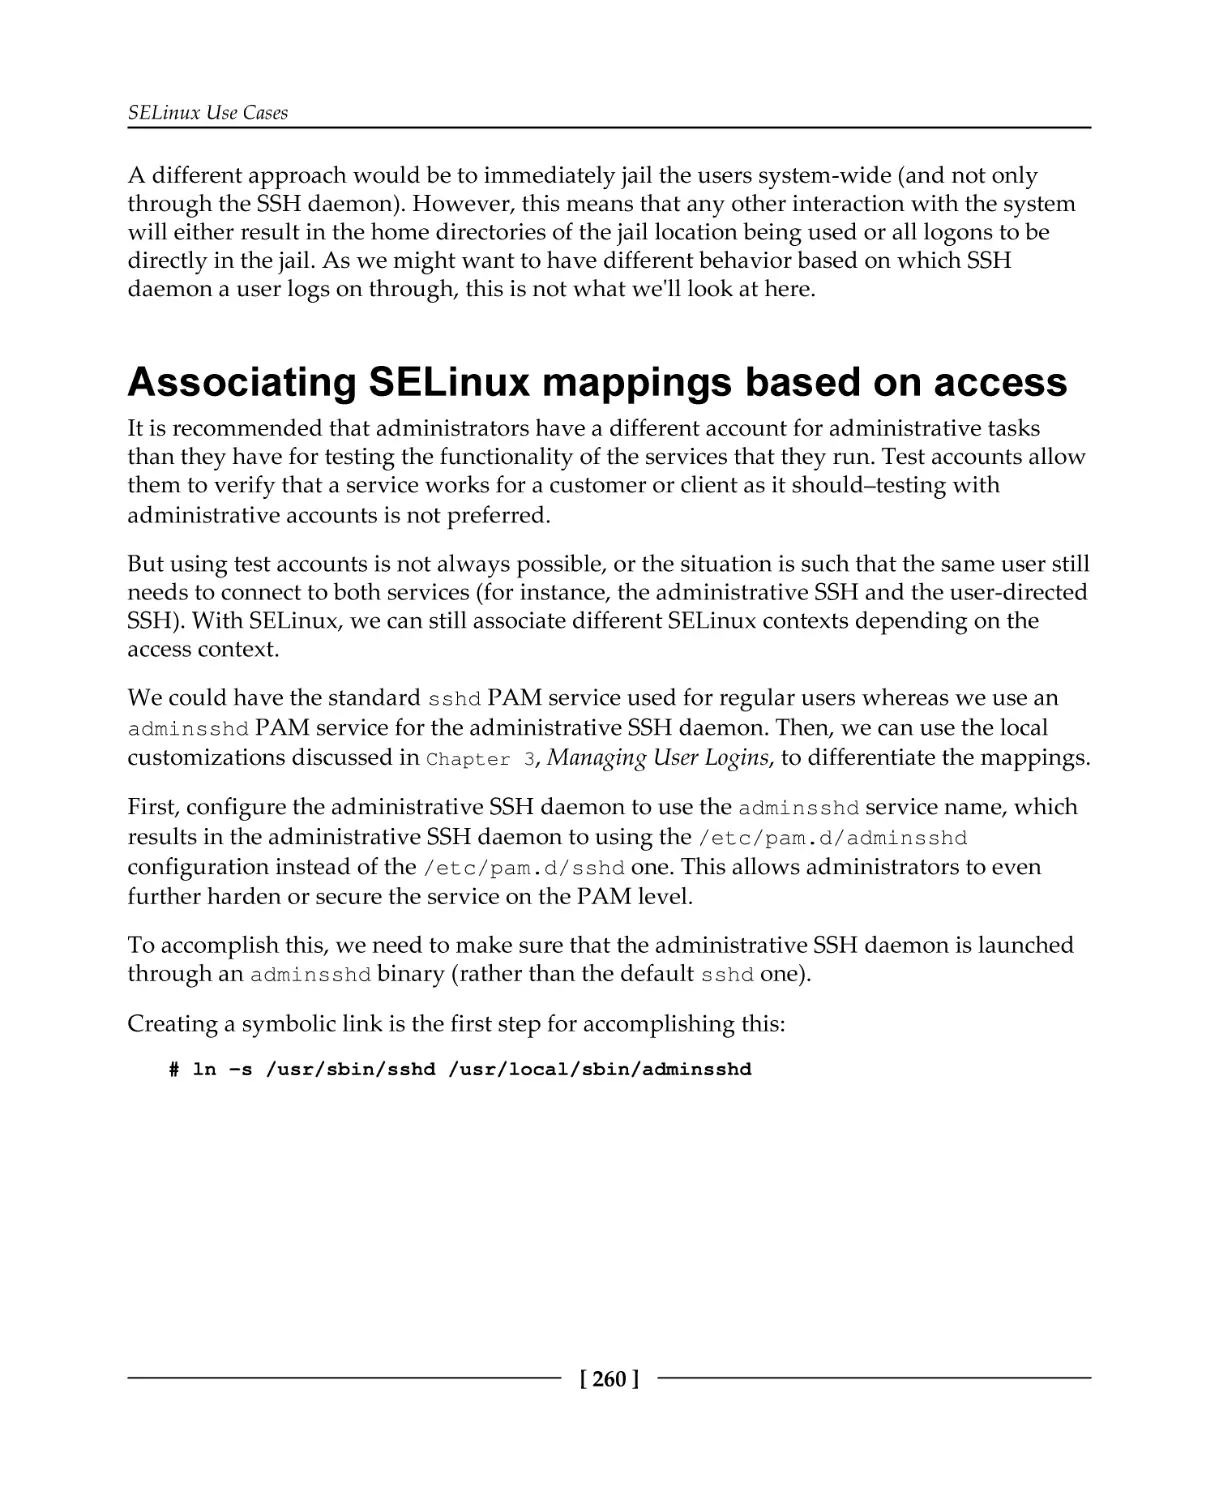 Associating SELinux mappings based on access